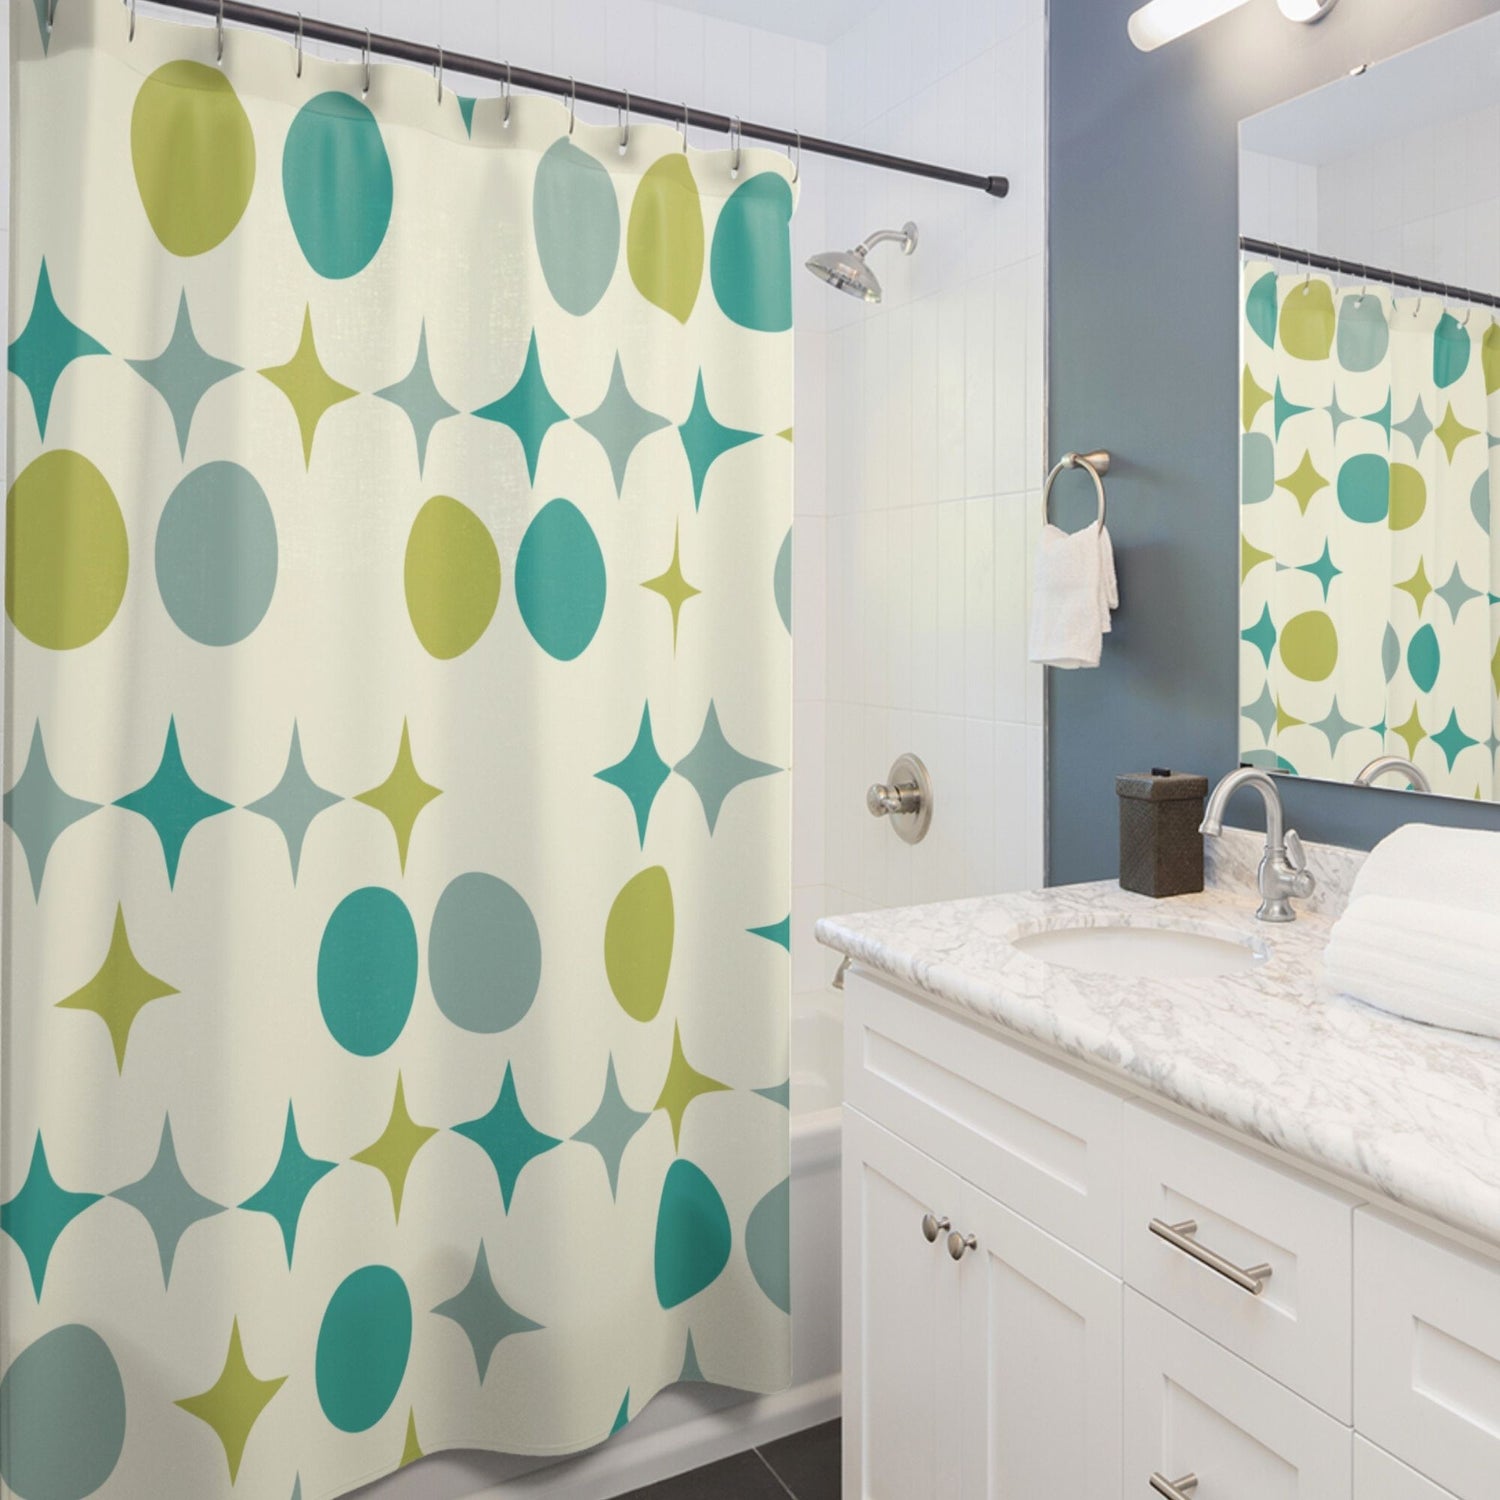 Retro-patterned shower curtain with teal and green ovals and starbursts in a modern white bathroom with marble countertop.